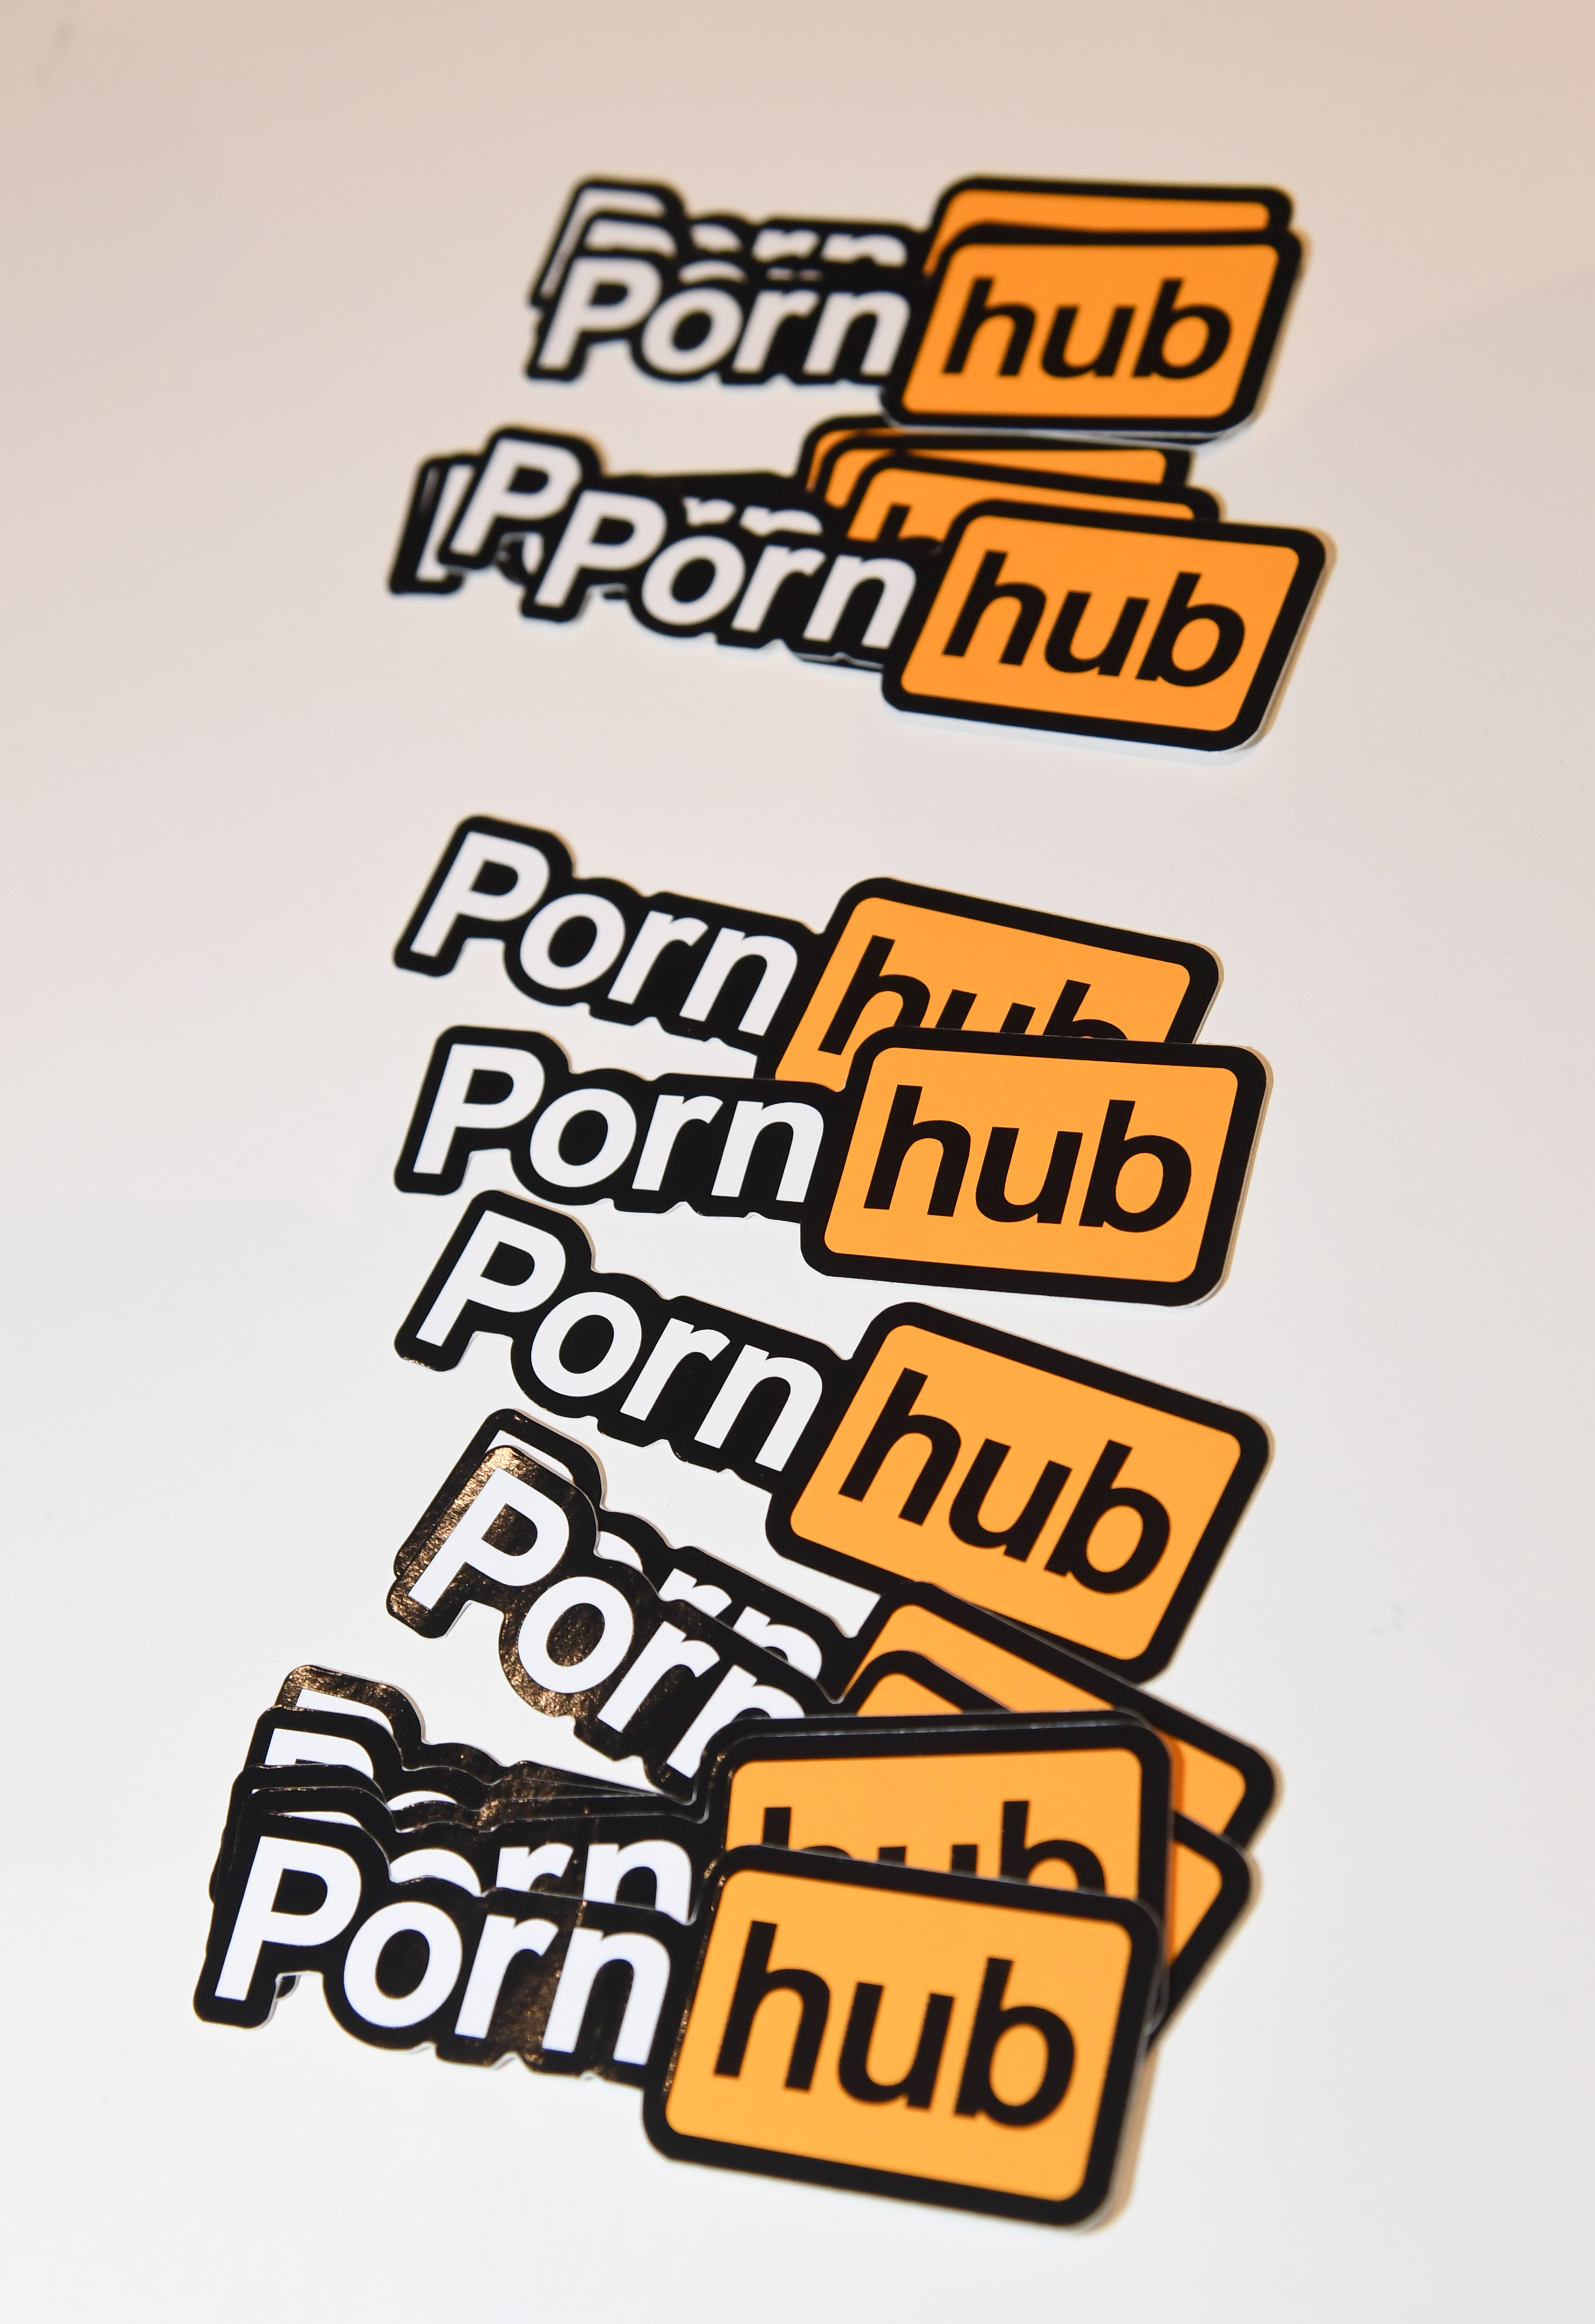 Pornhub Just Purged All Unverified Content From the Platform picture